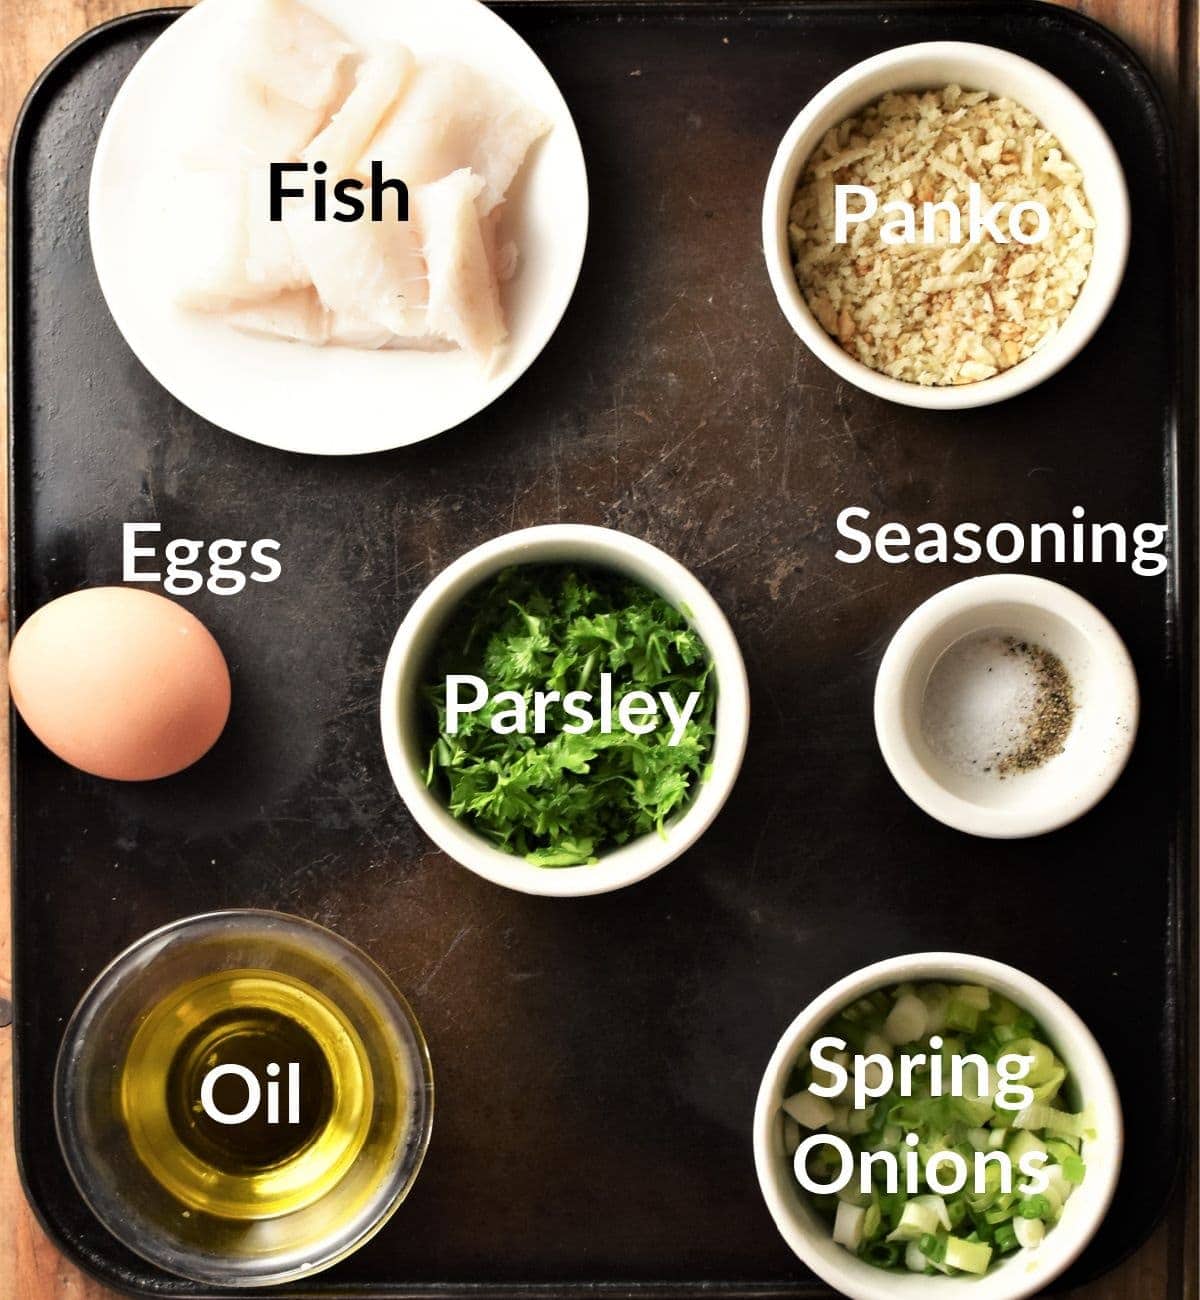 Fish cakes ingredients in individual dishes.